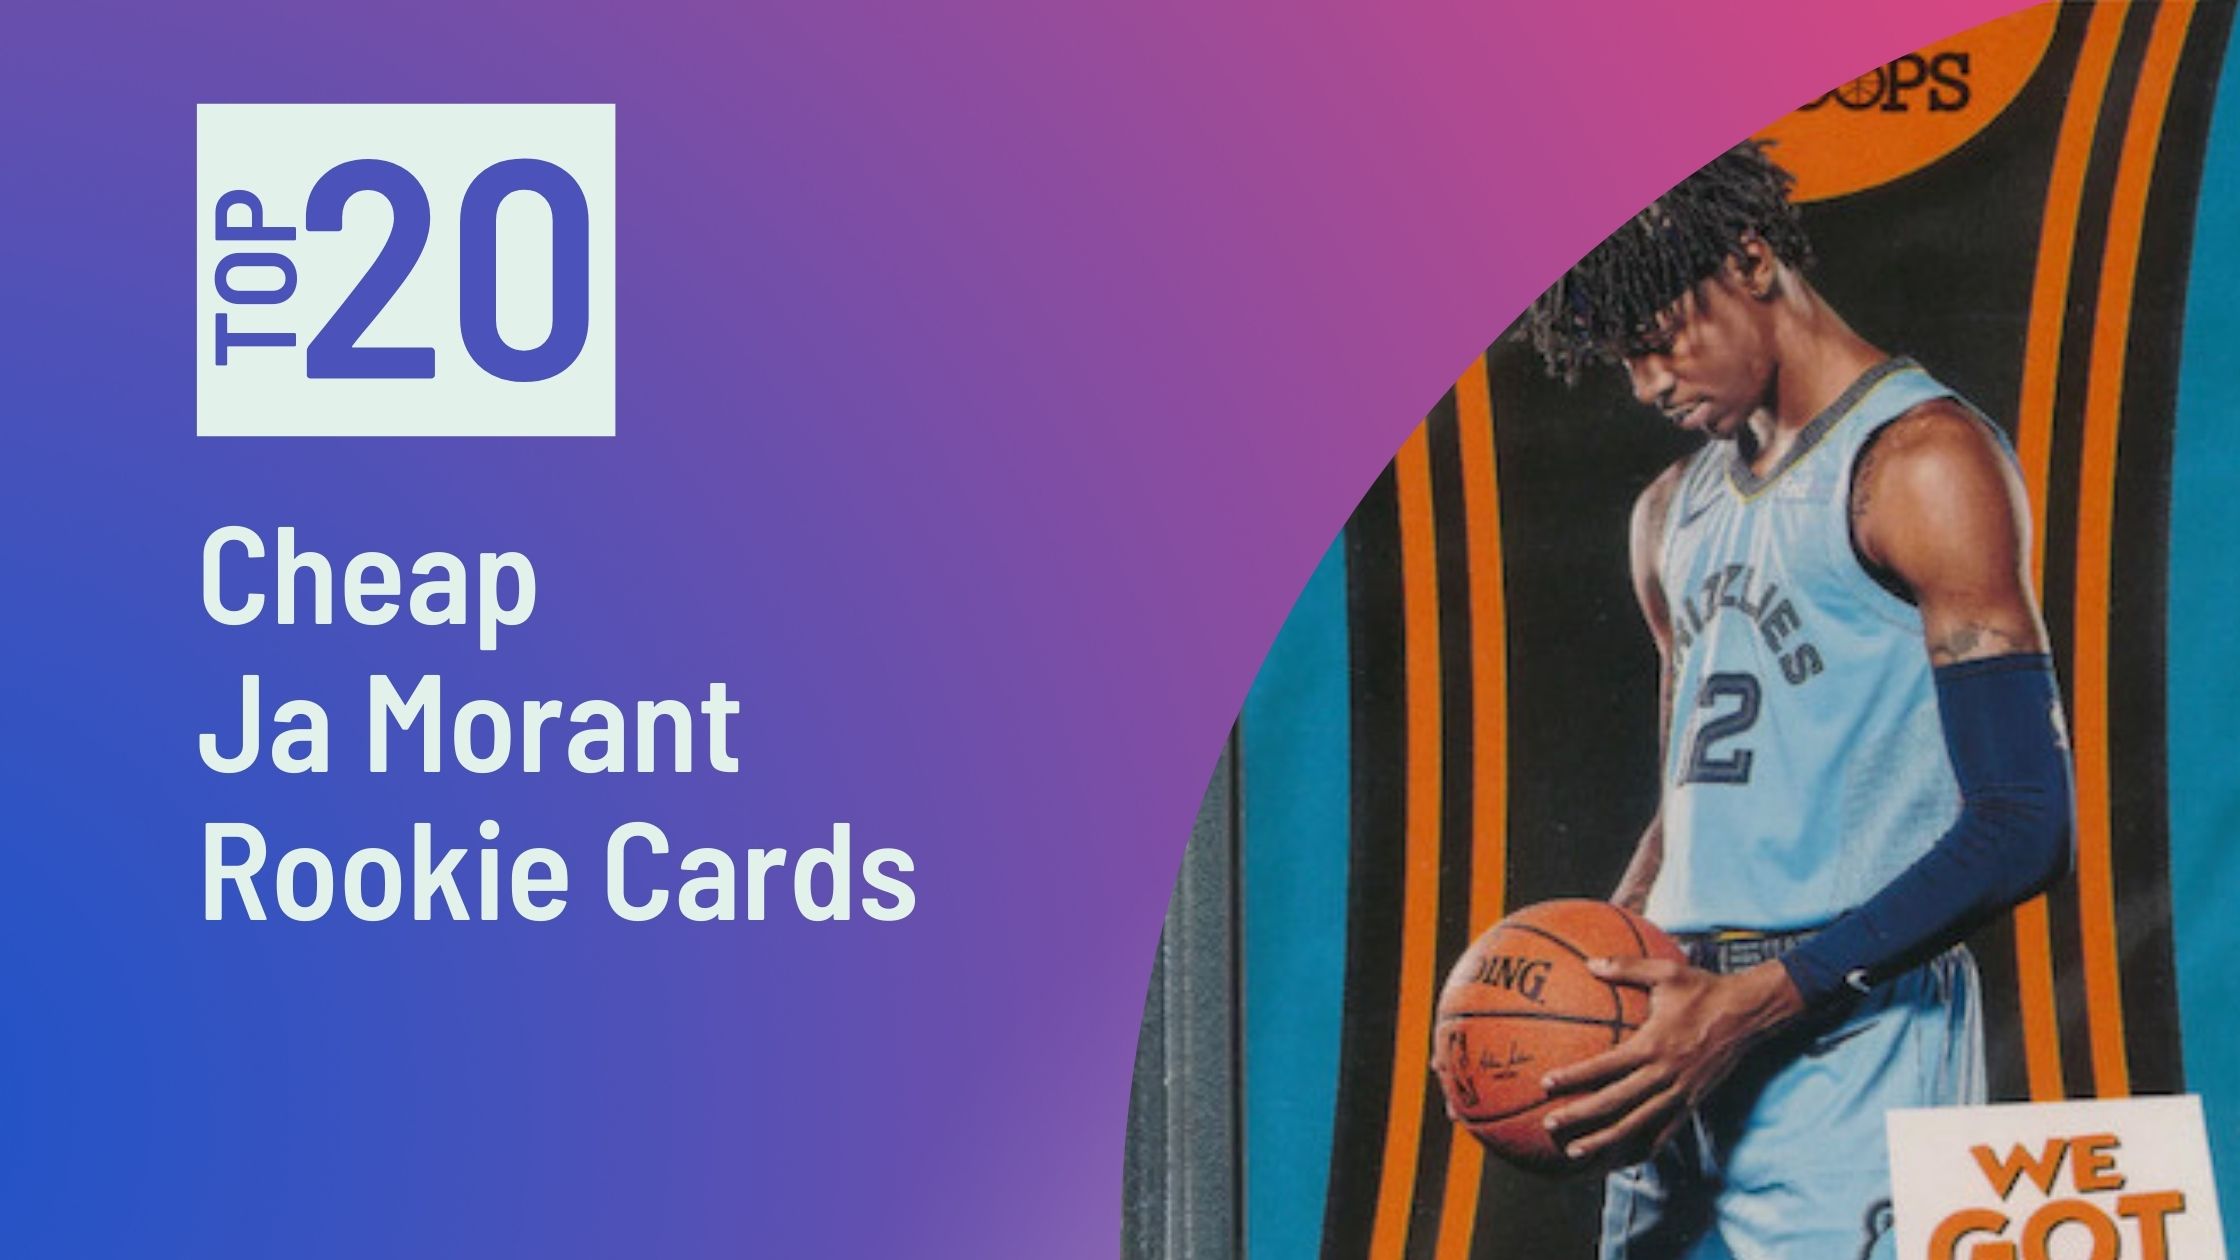 Featured image for the Cheap Ja Morant Rookie Cards blog post on Sports Card Sharks